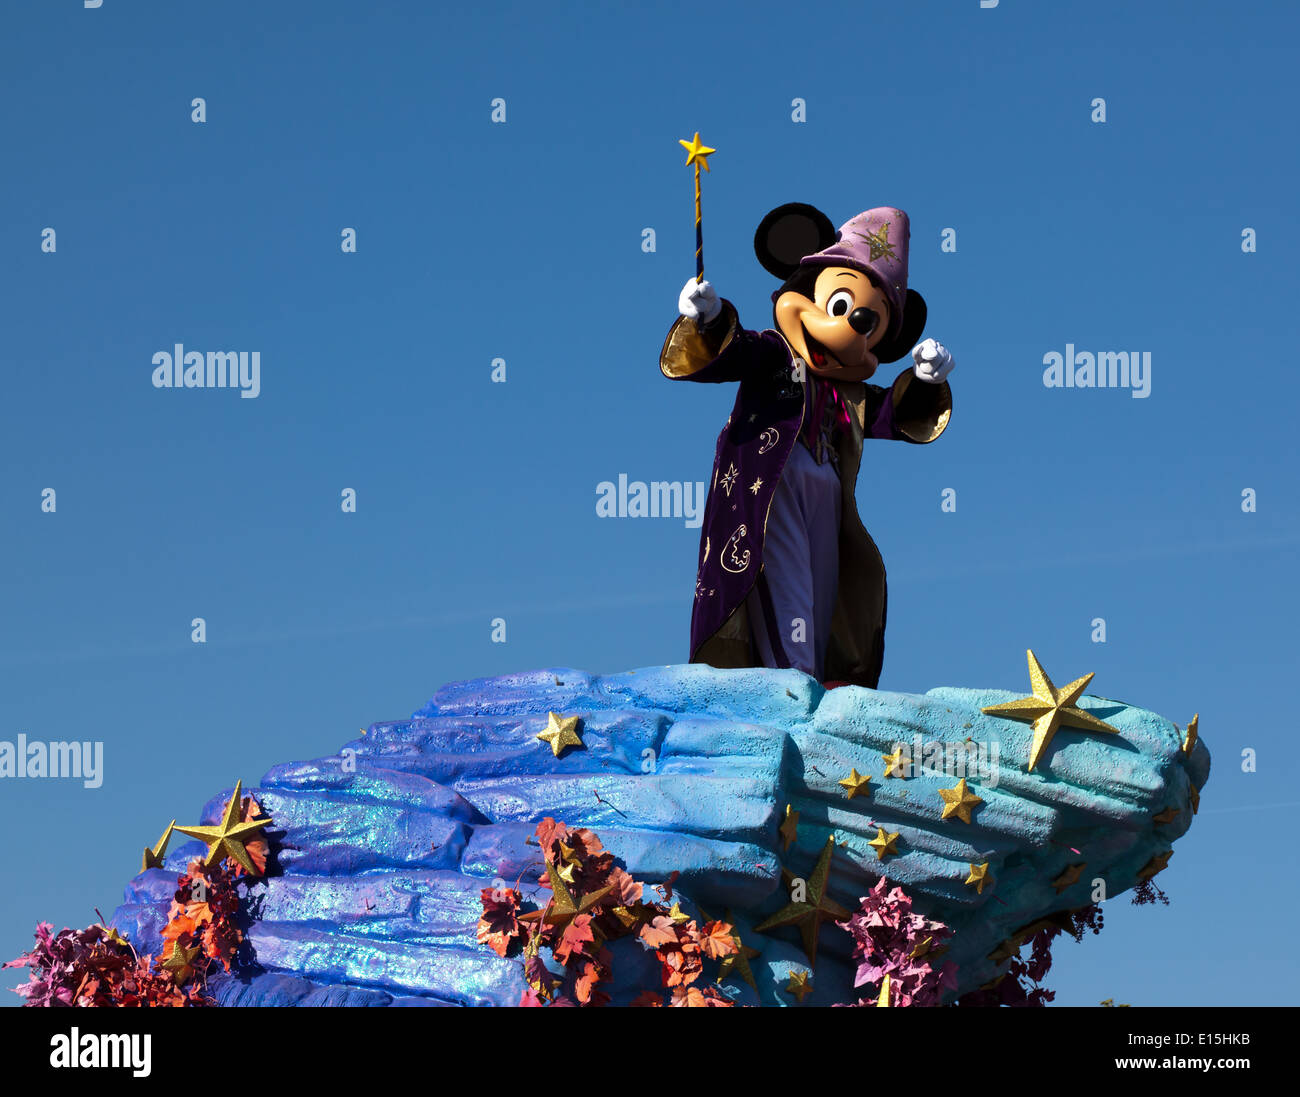 A Disney Parade with Micky Mouse dressed as  'The Sorcerer's Apprentice' from the Disney film Fantasia. Stock Photo